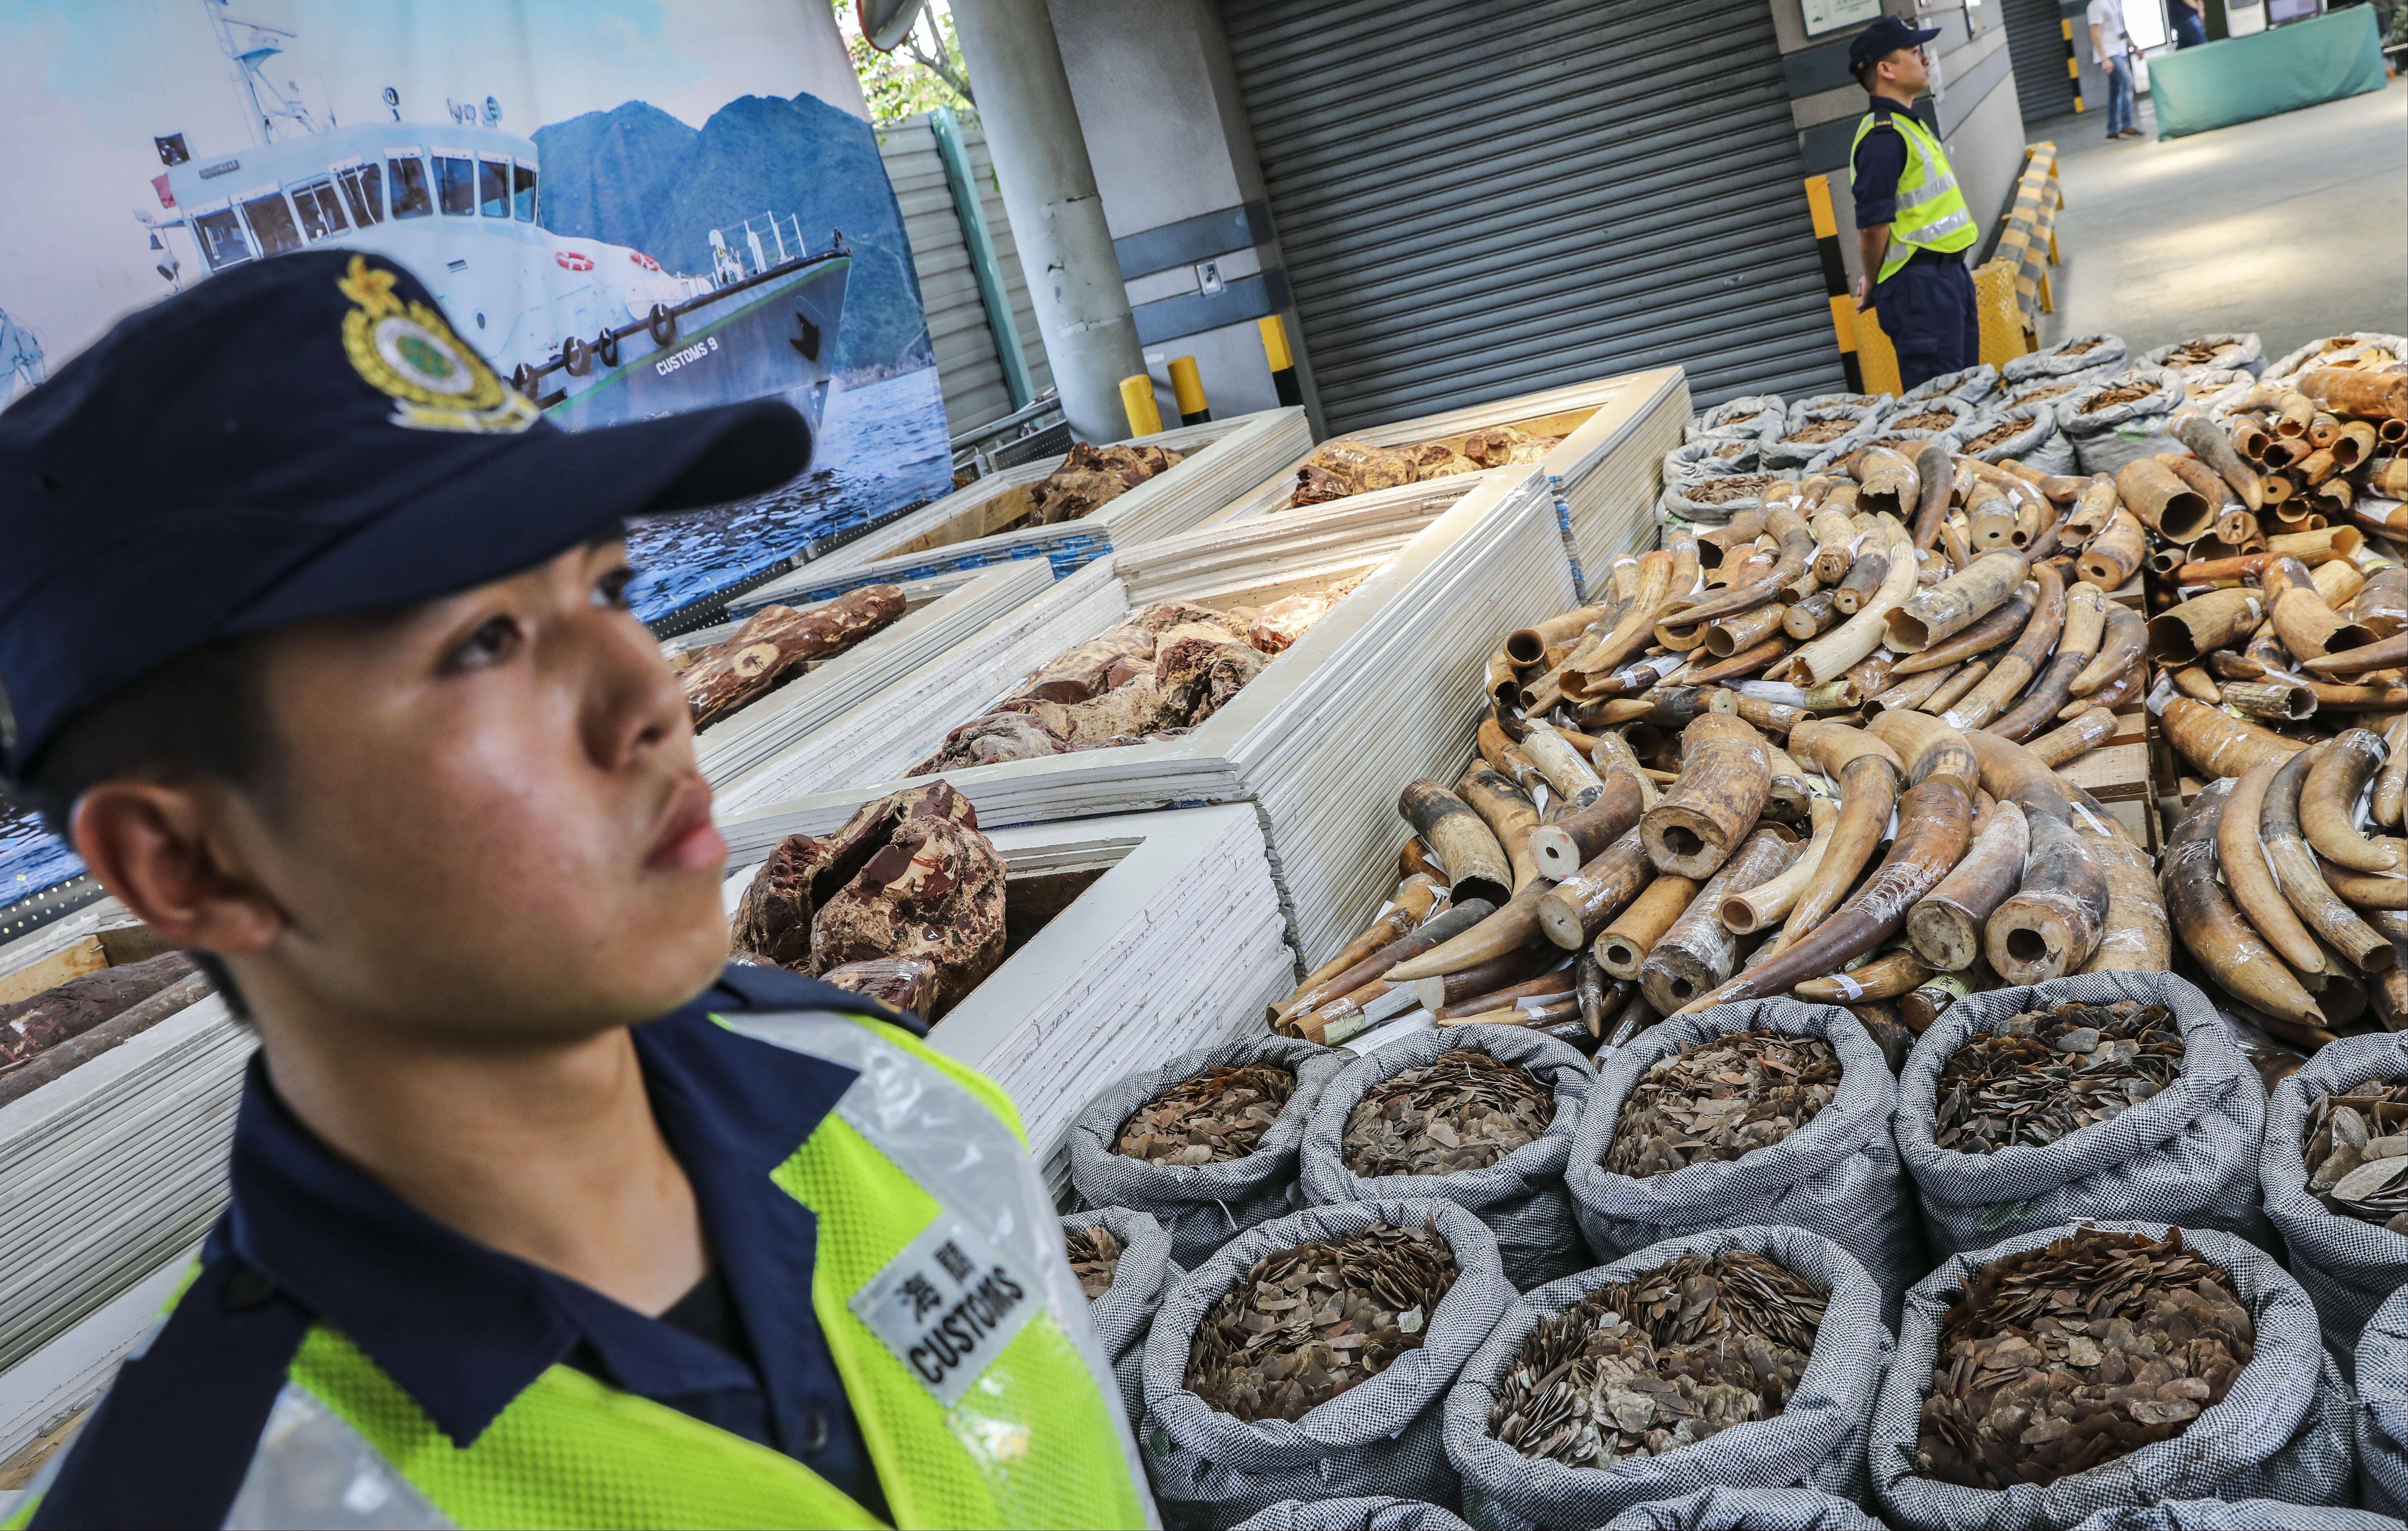 Endangered animal parts seized by Hong Kong customs in Kwai Chung. Photo: K. Y. Cheng